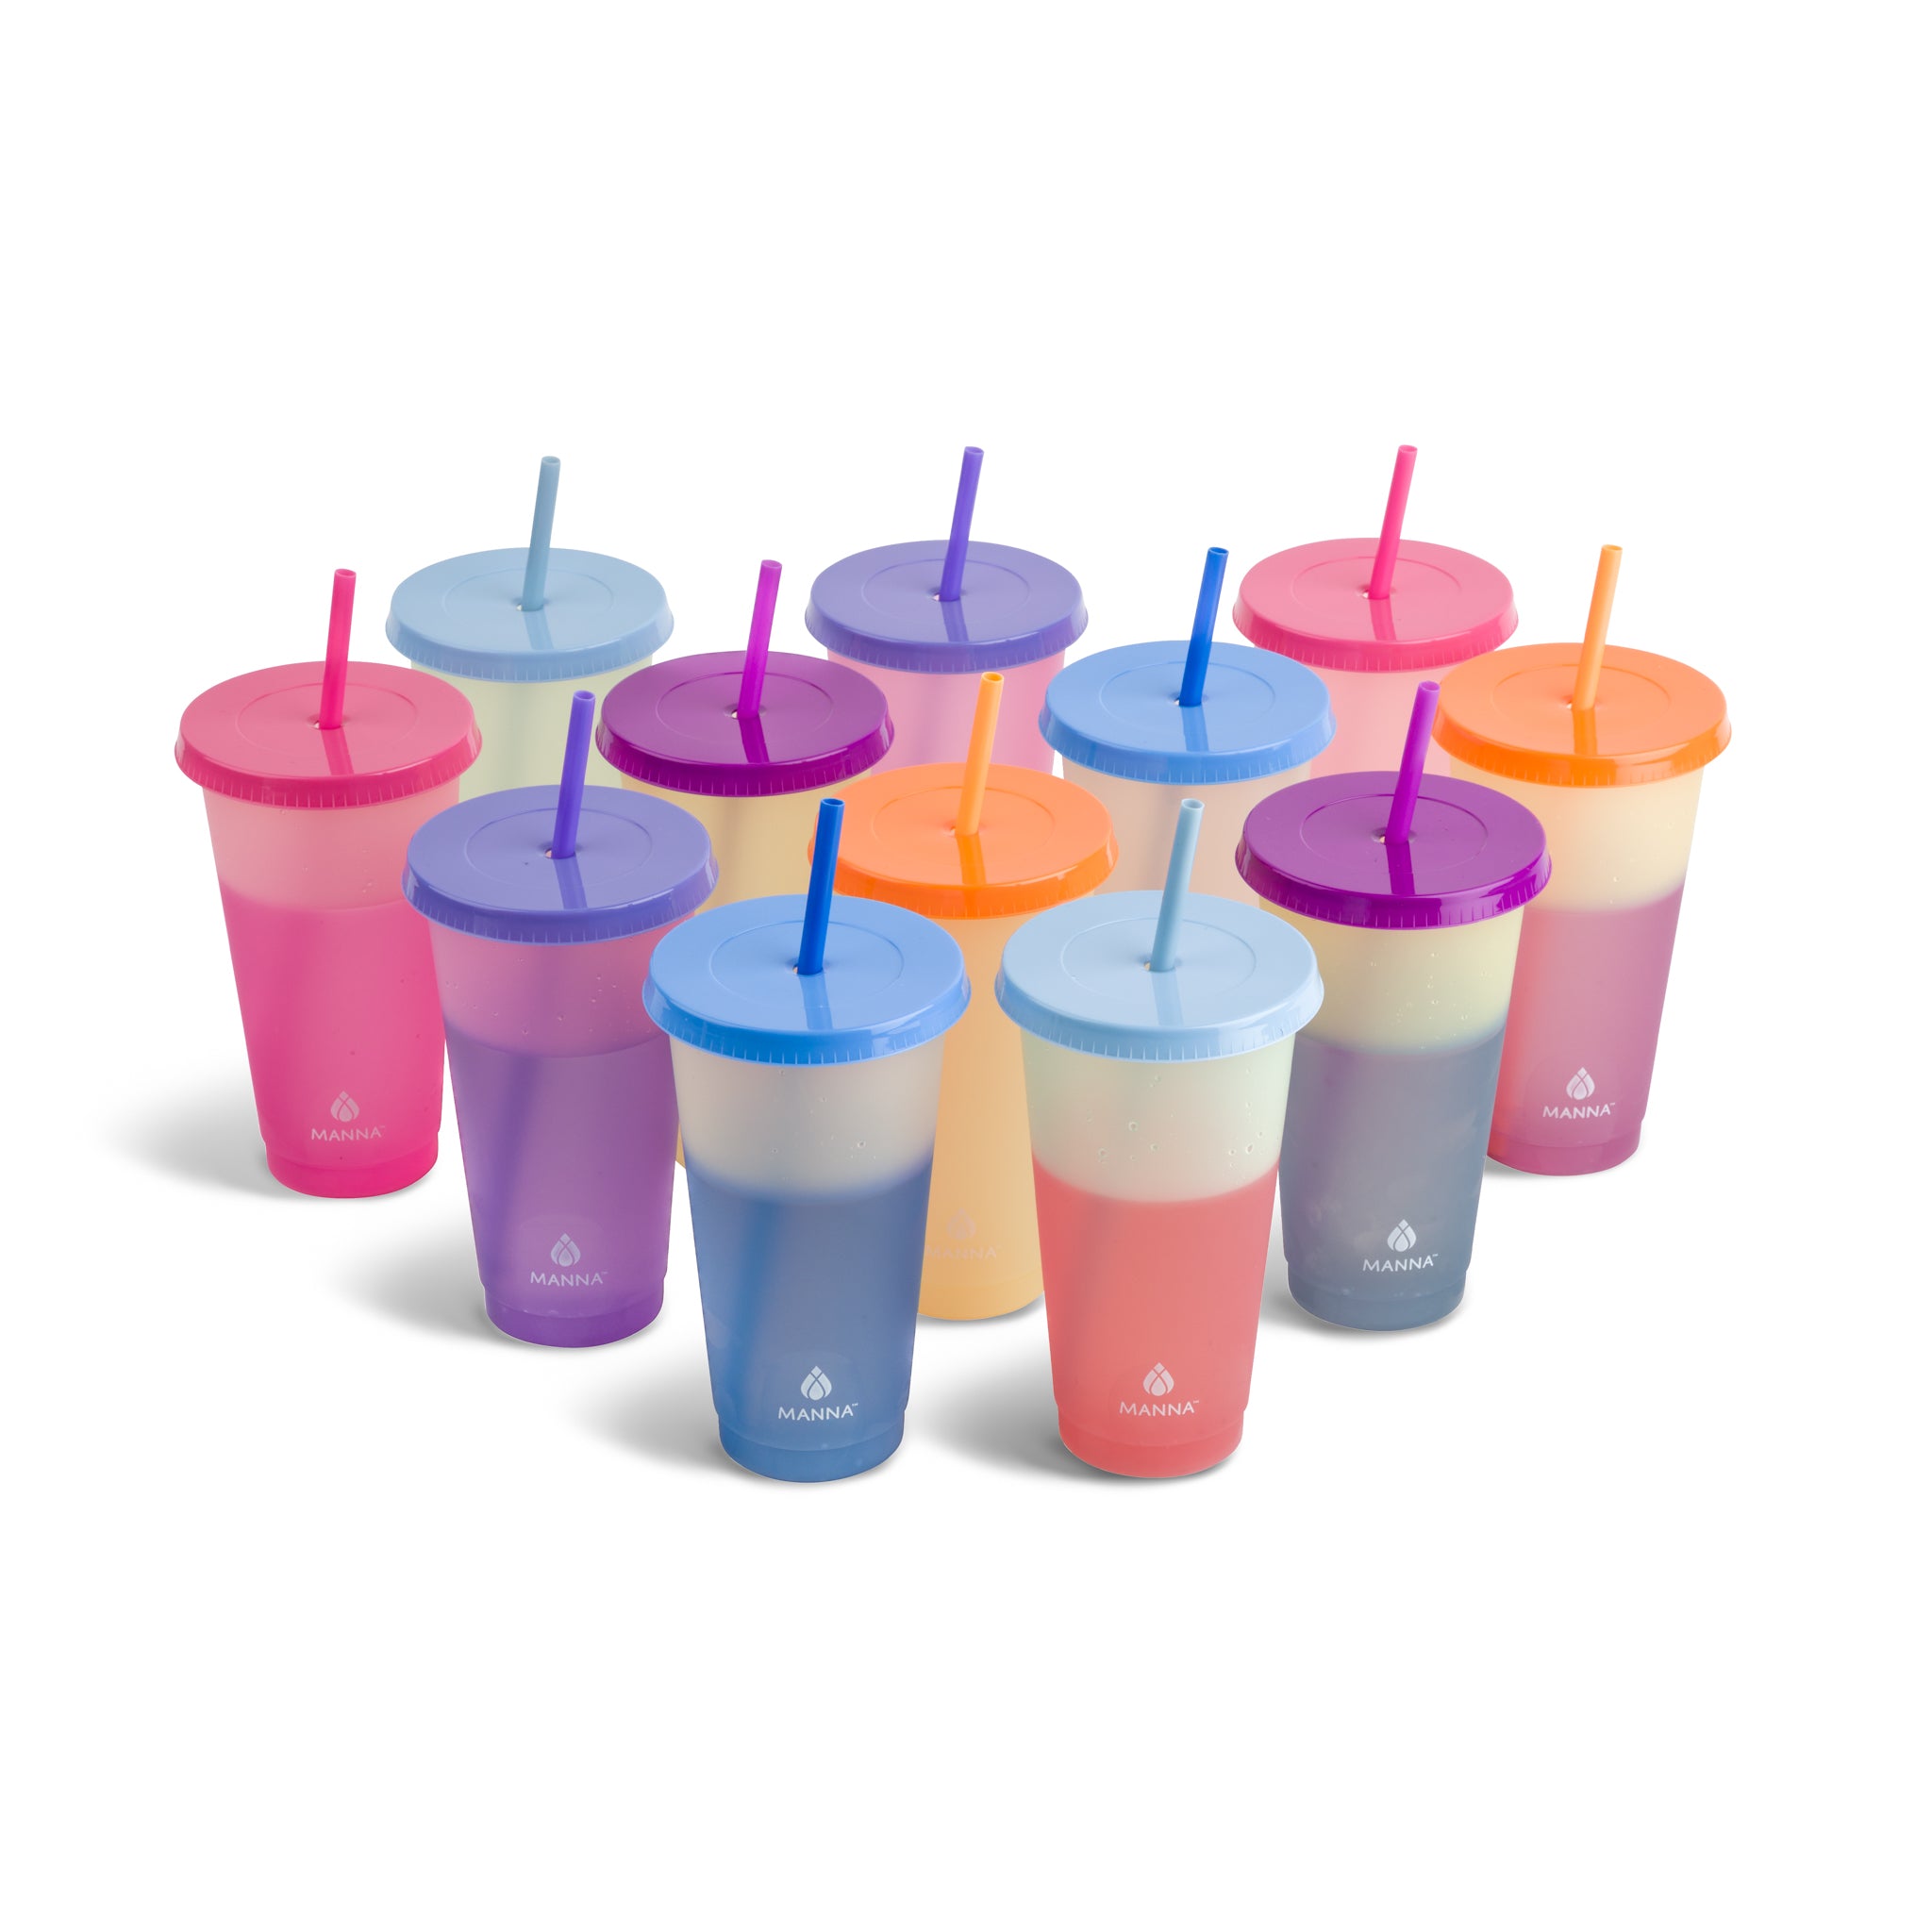 Tal Color Changing Cups 24 fl oz, 4 Pack